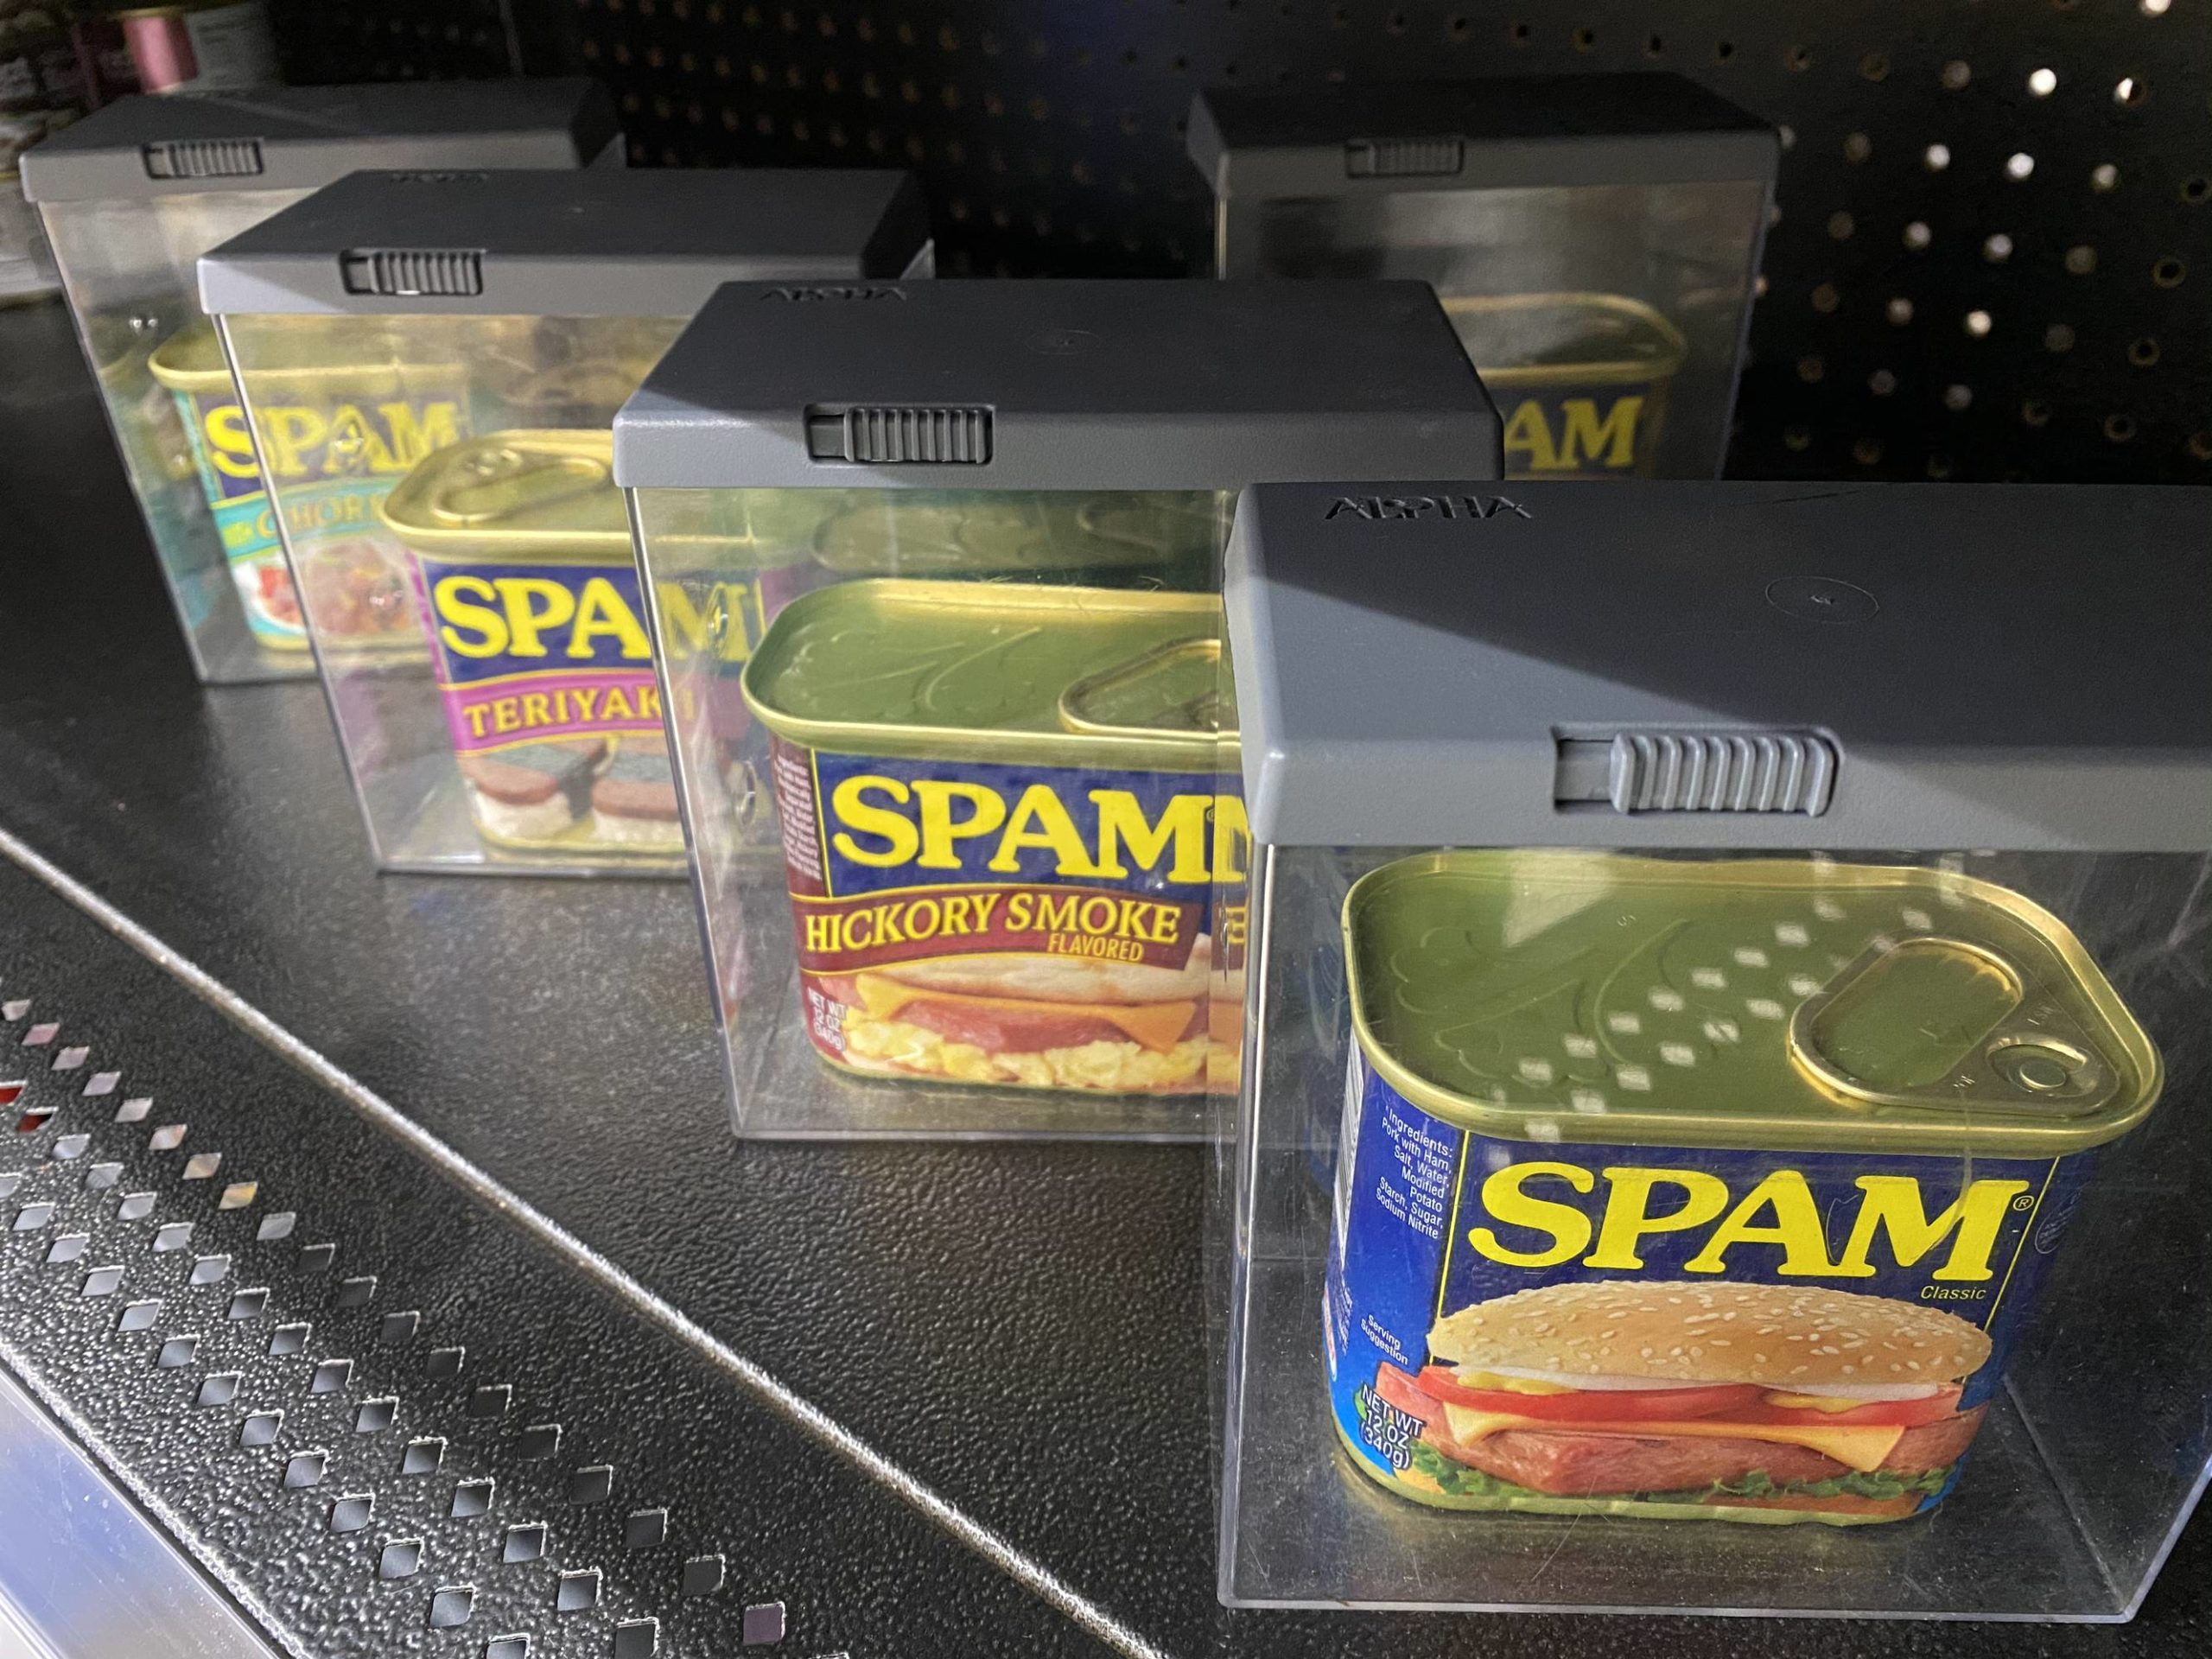 Spam+is+stolen+so+often+in+Hawaii+that+Walmart+sells+individual+cans+in+theft-deterrent+containers